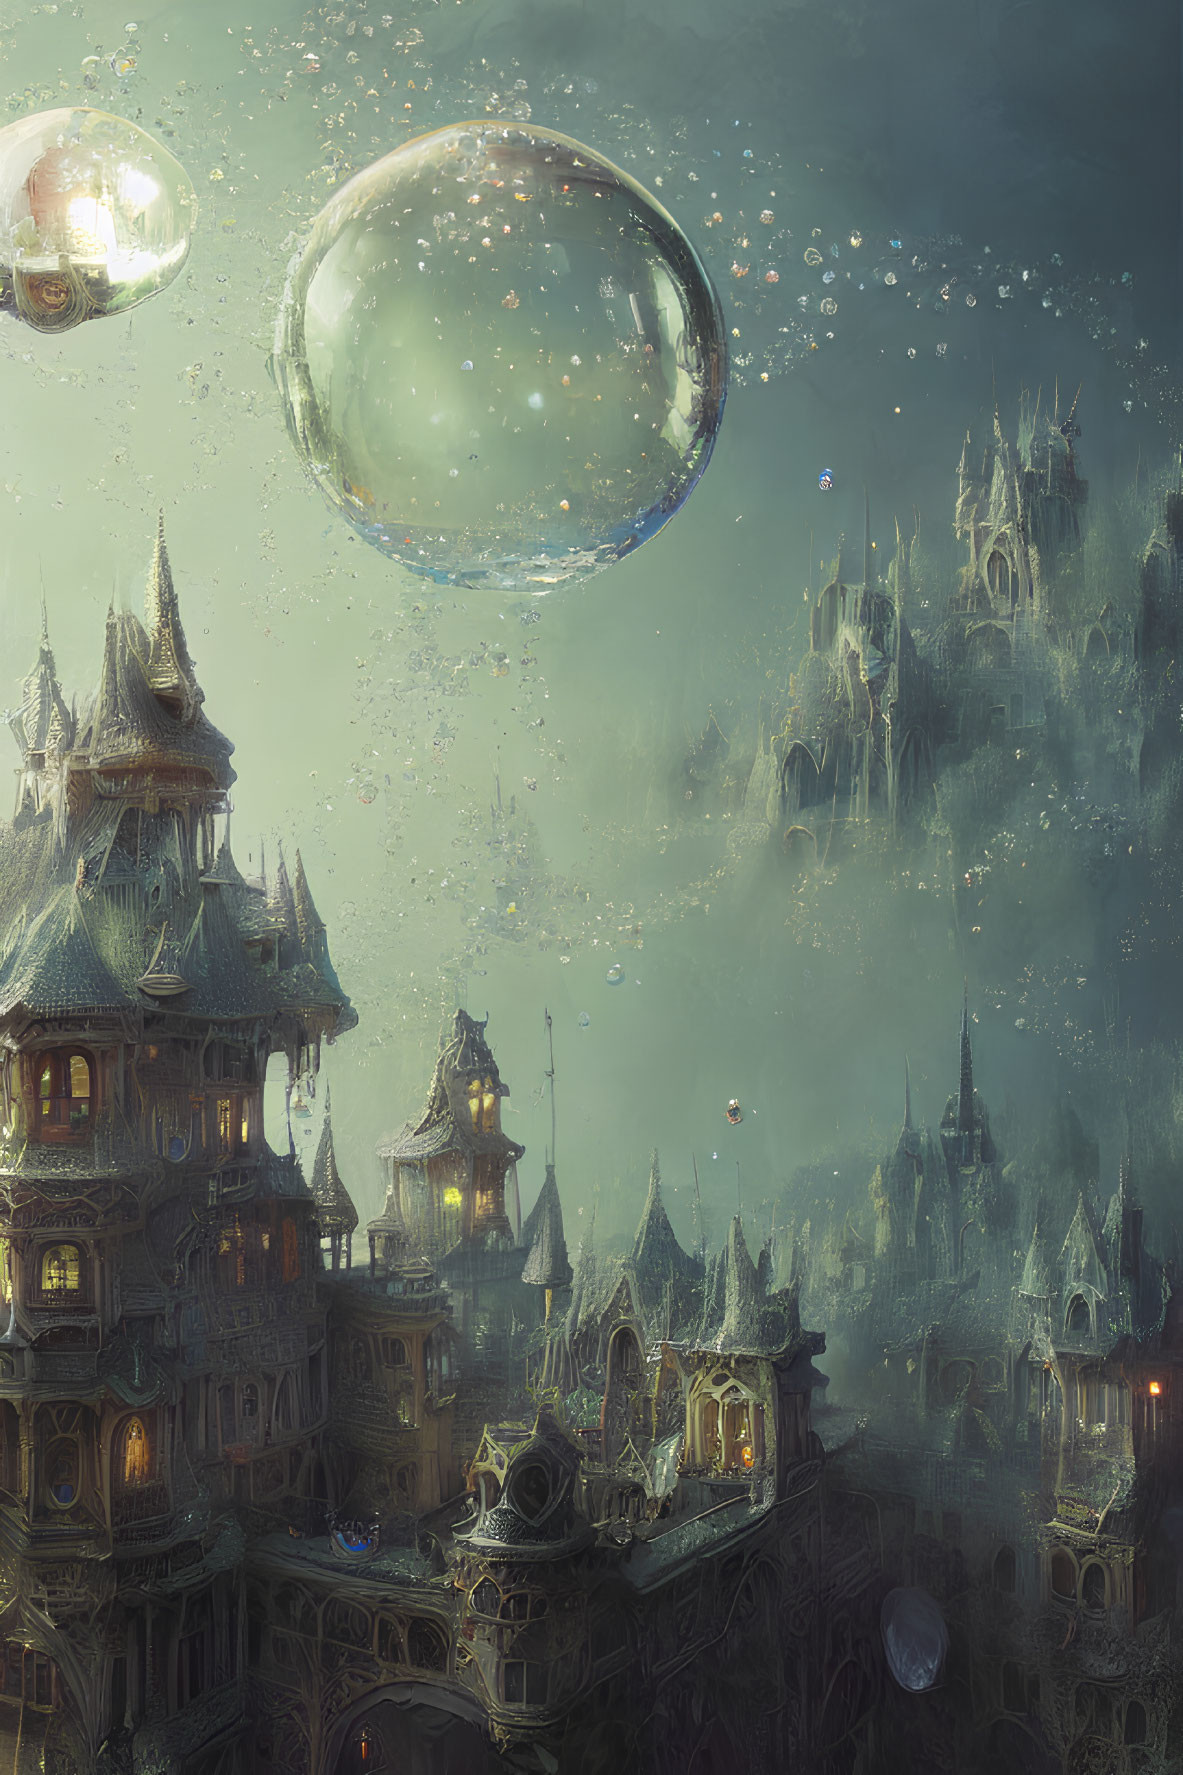 Fantastical Cityscape with Floating Bubbles and Illuminated Towers